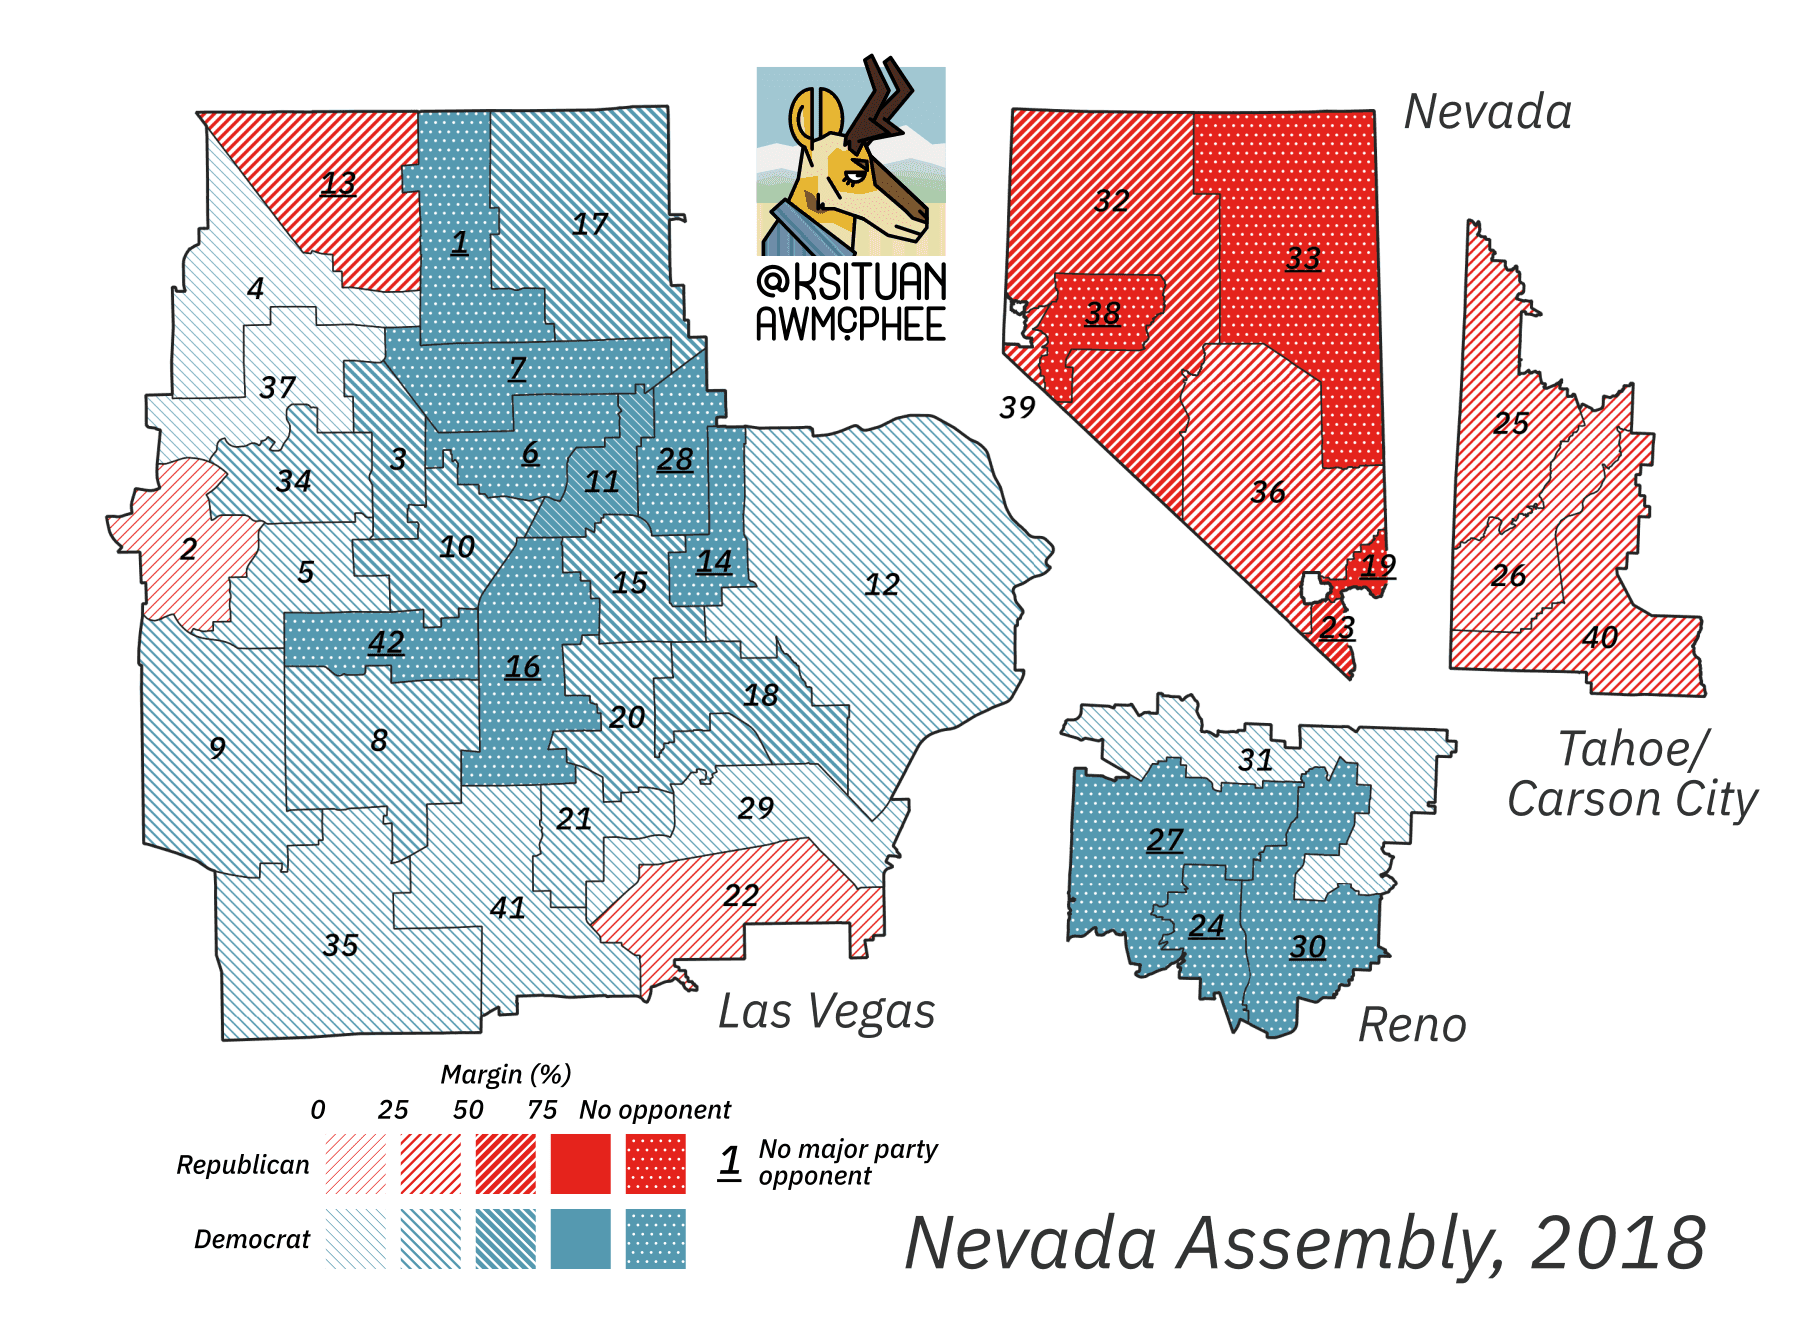 A political map of Nevada.